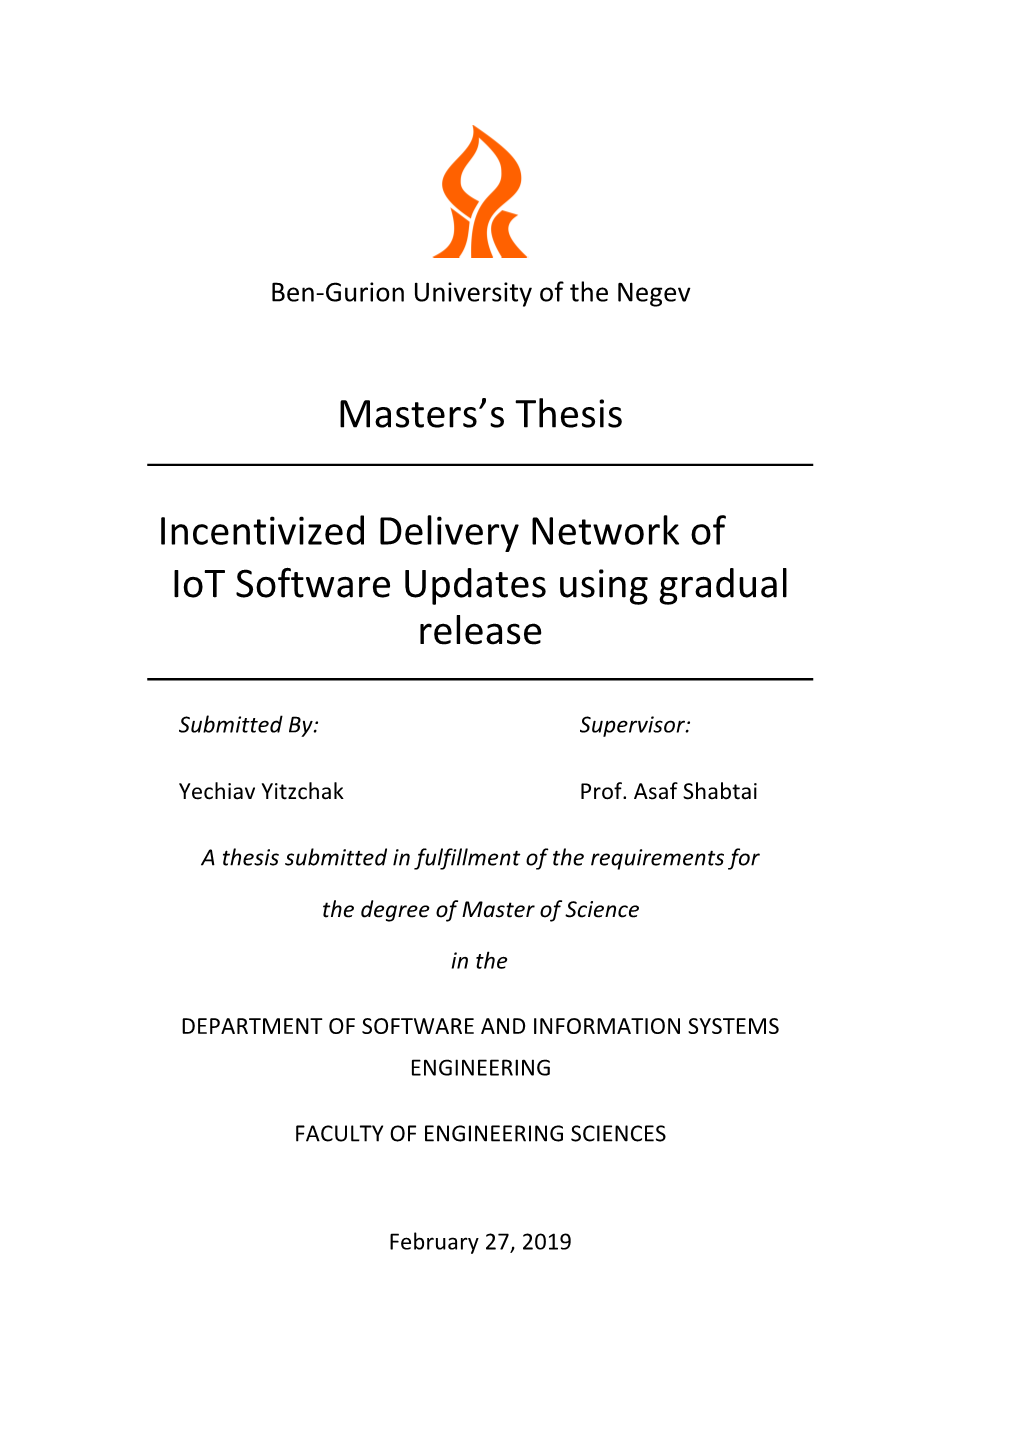 Masters's Thesis Incentivized Delivery Network of Iot Software Updates